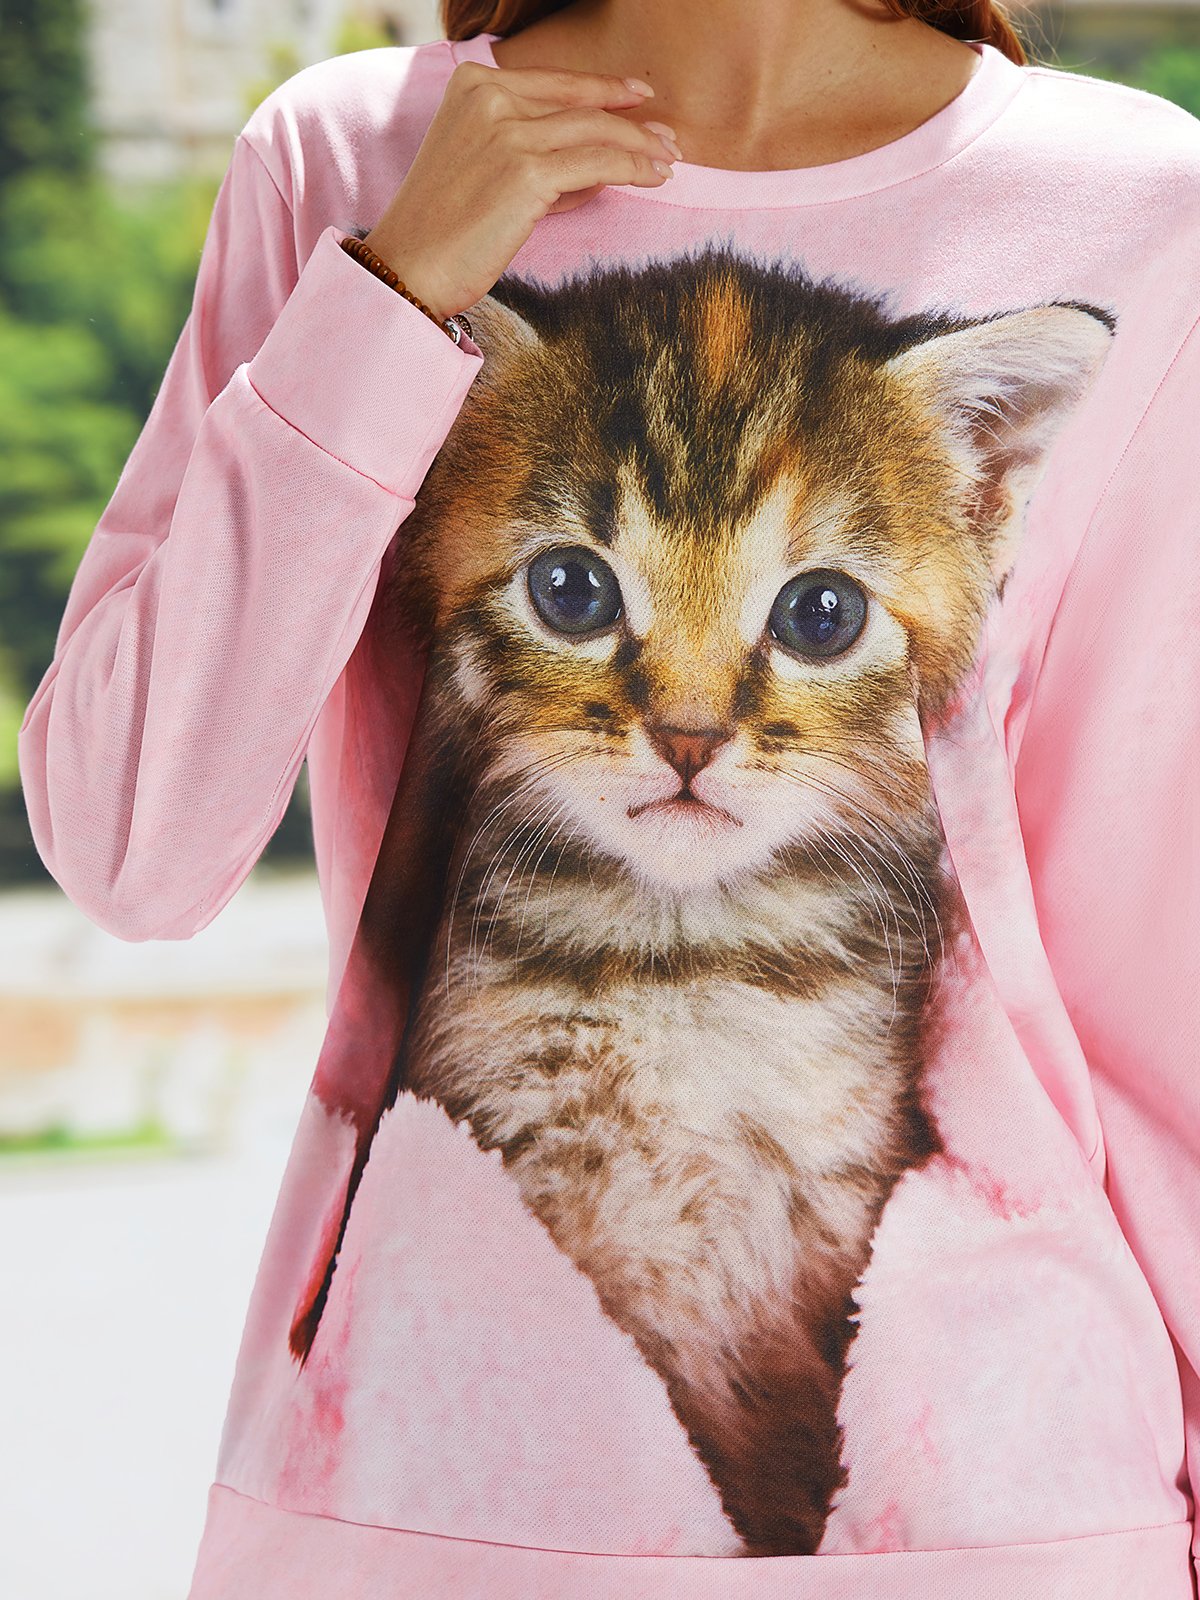 Funny And Cute Cat Round Neck Loose Sweater